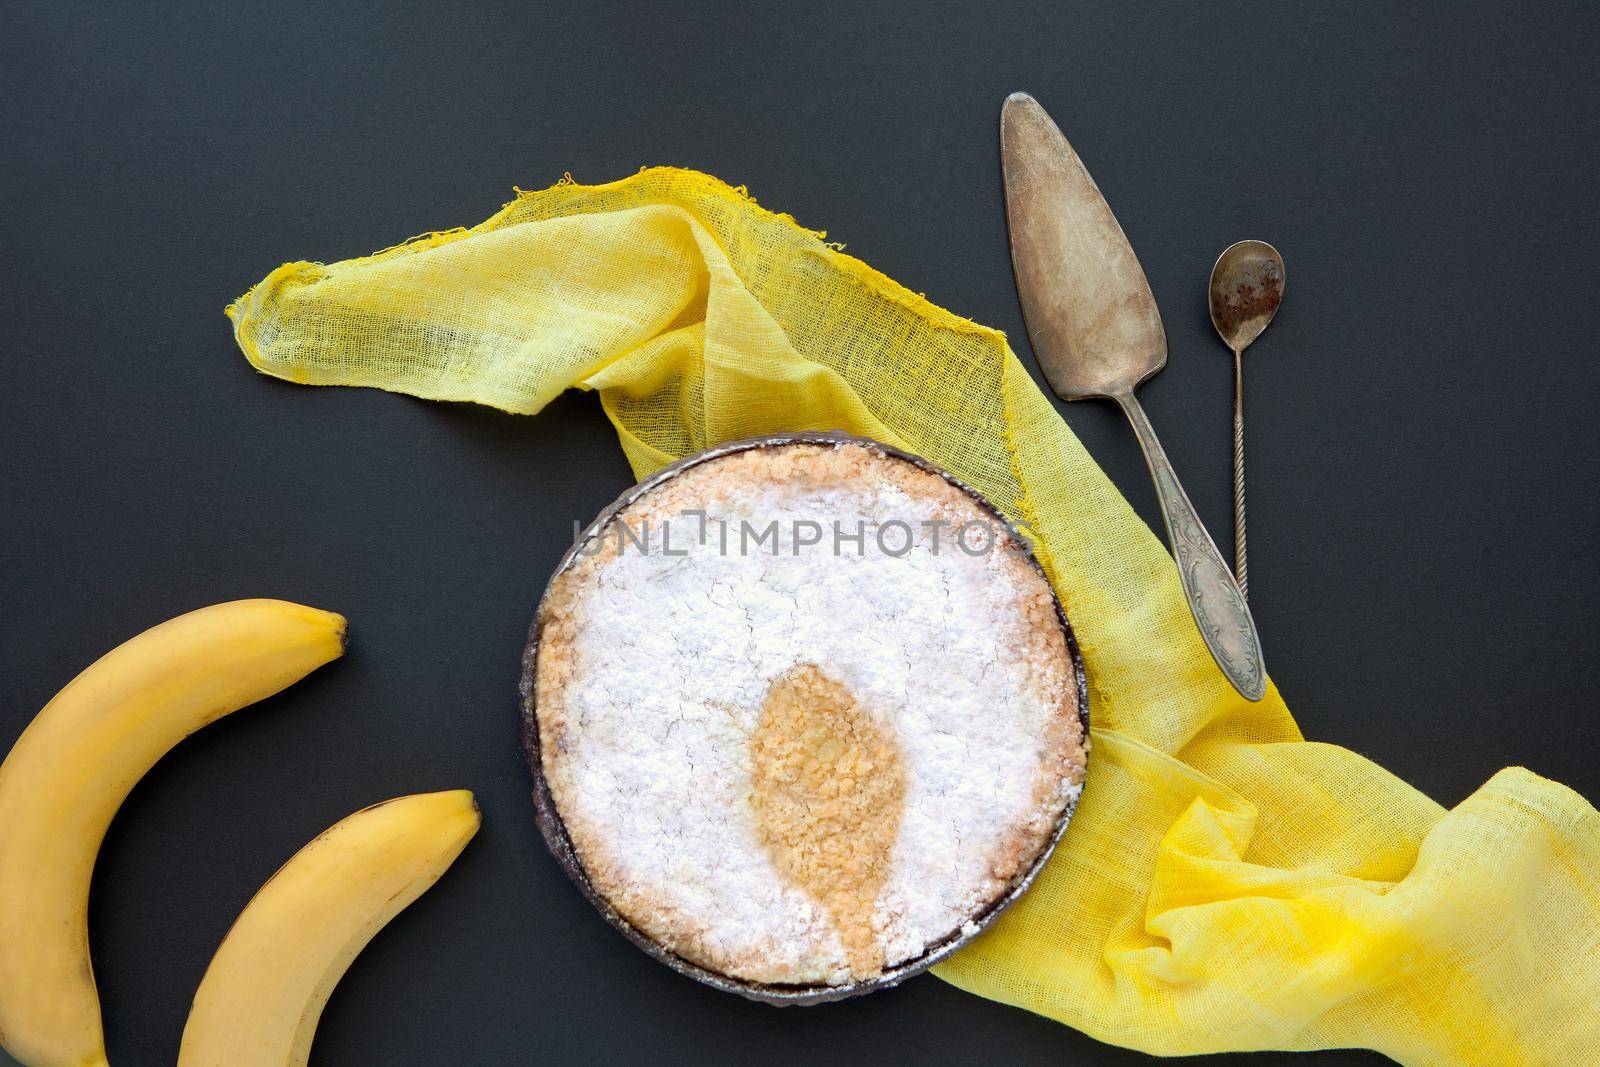 Banana cake on a black background with yellow blanket and retrospoons. Homemade pie on a dark backdrop and powdered sugar spoon shadow.